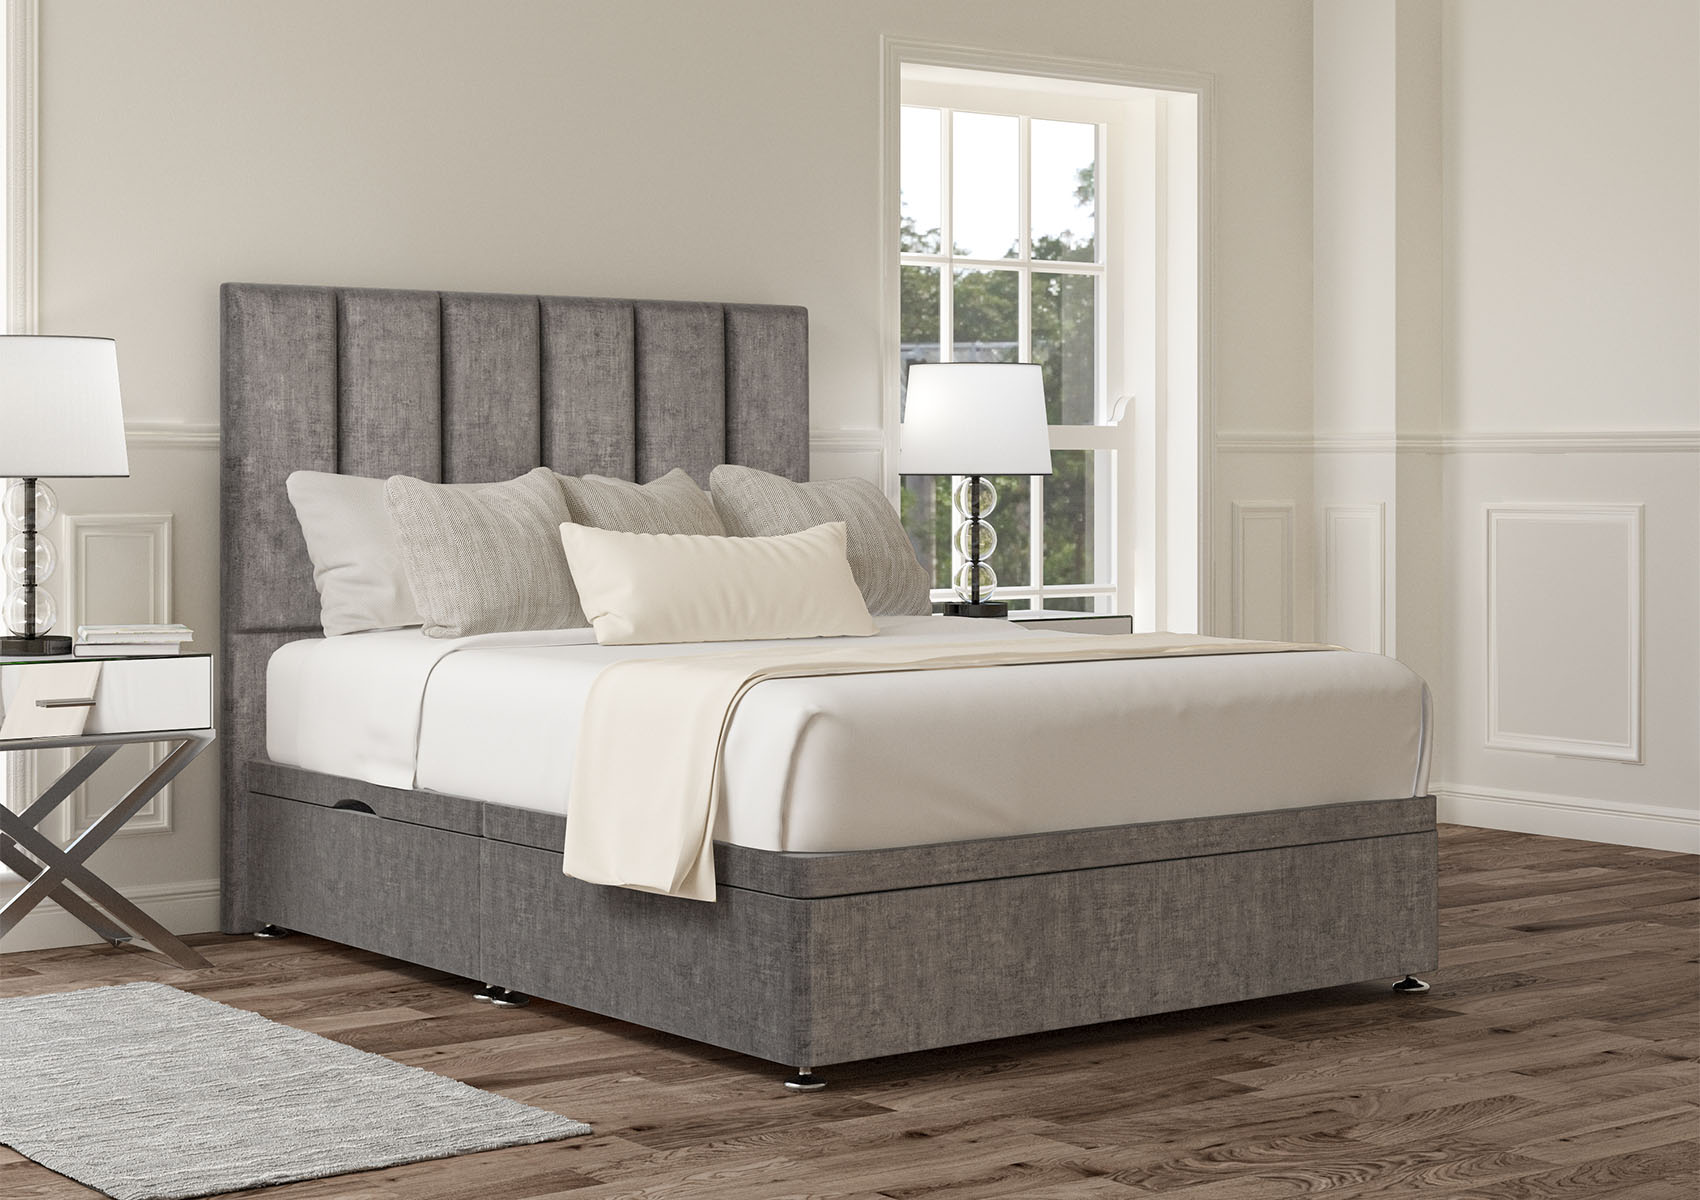 View Empire Carina Parchment Upholstered King Size Ottoman Bed Time4Sleep information